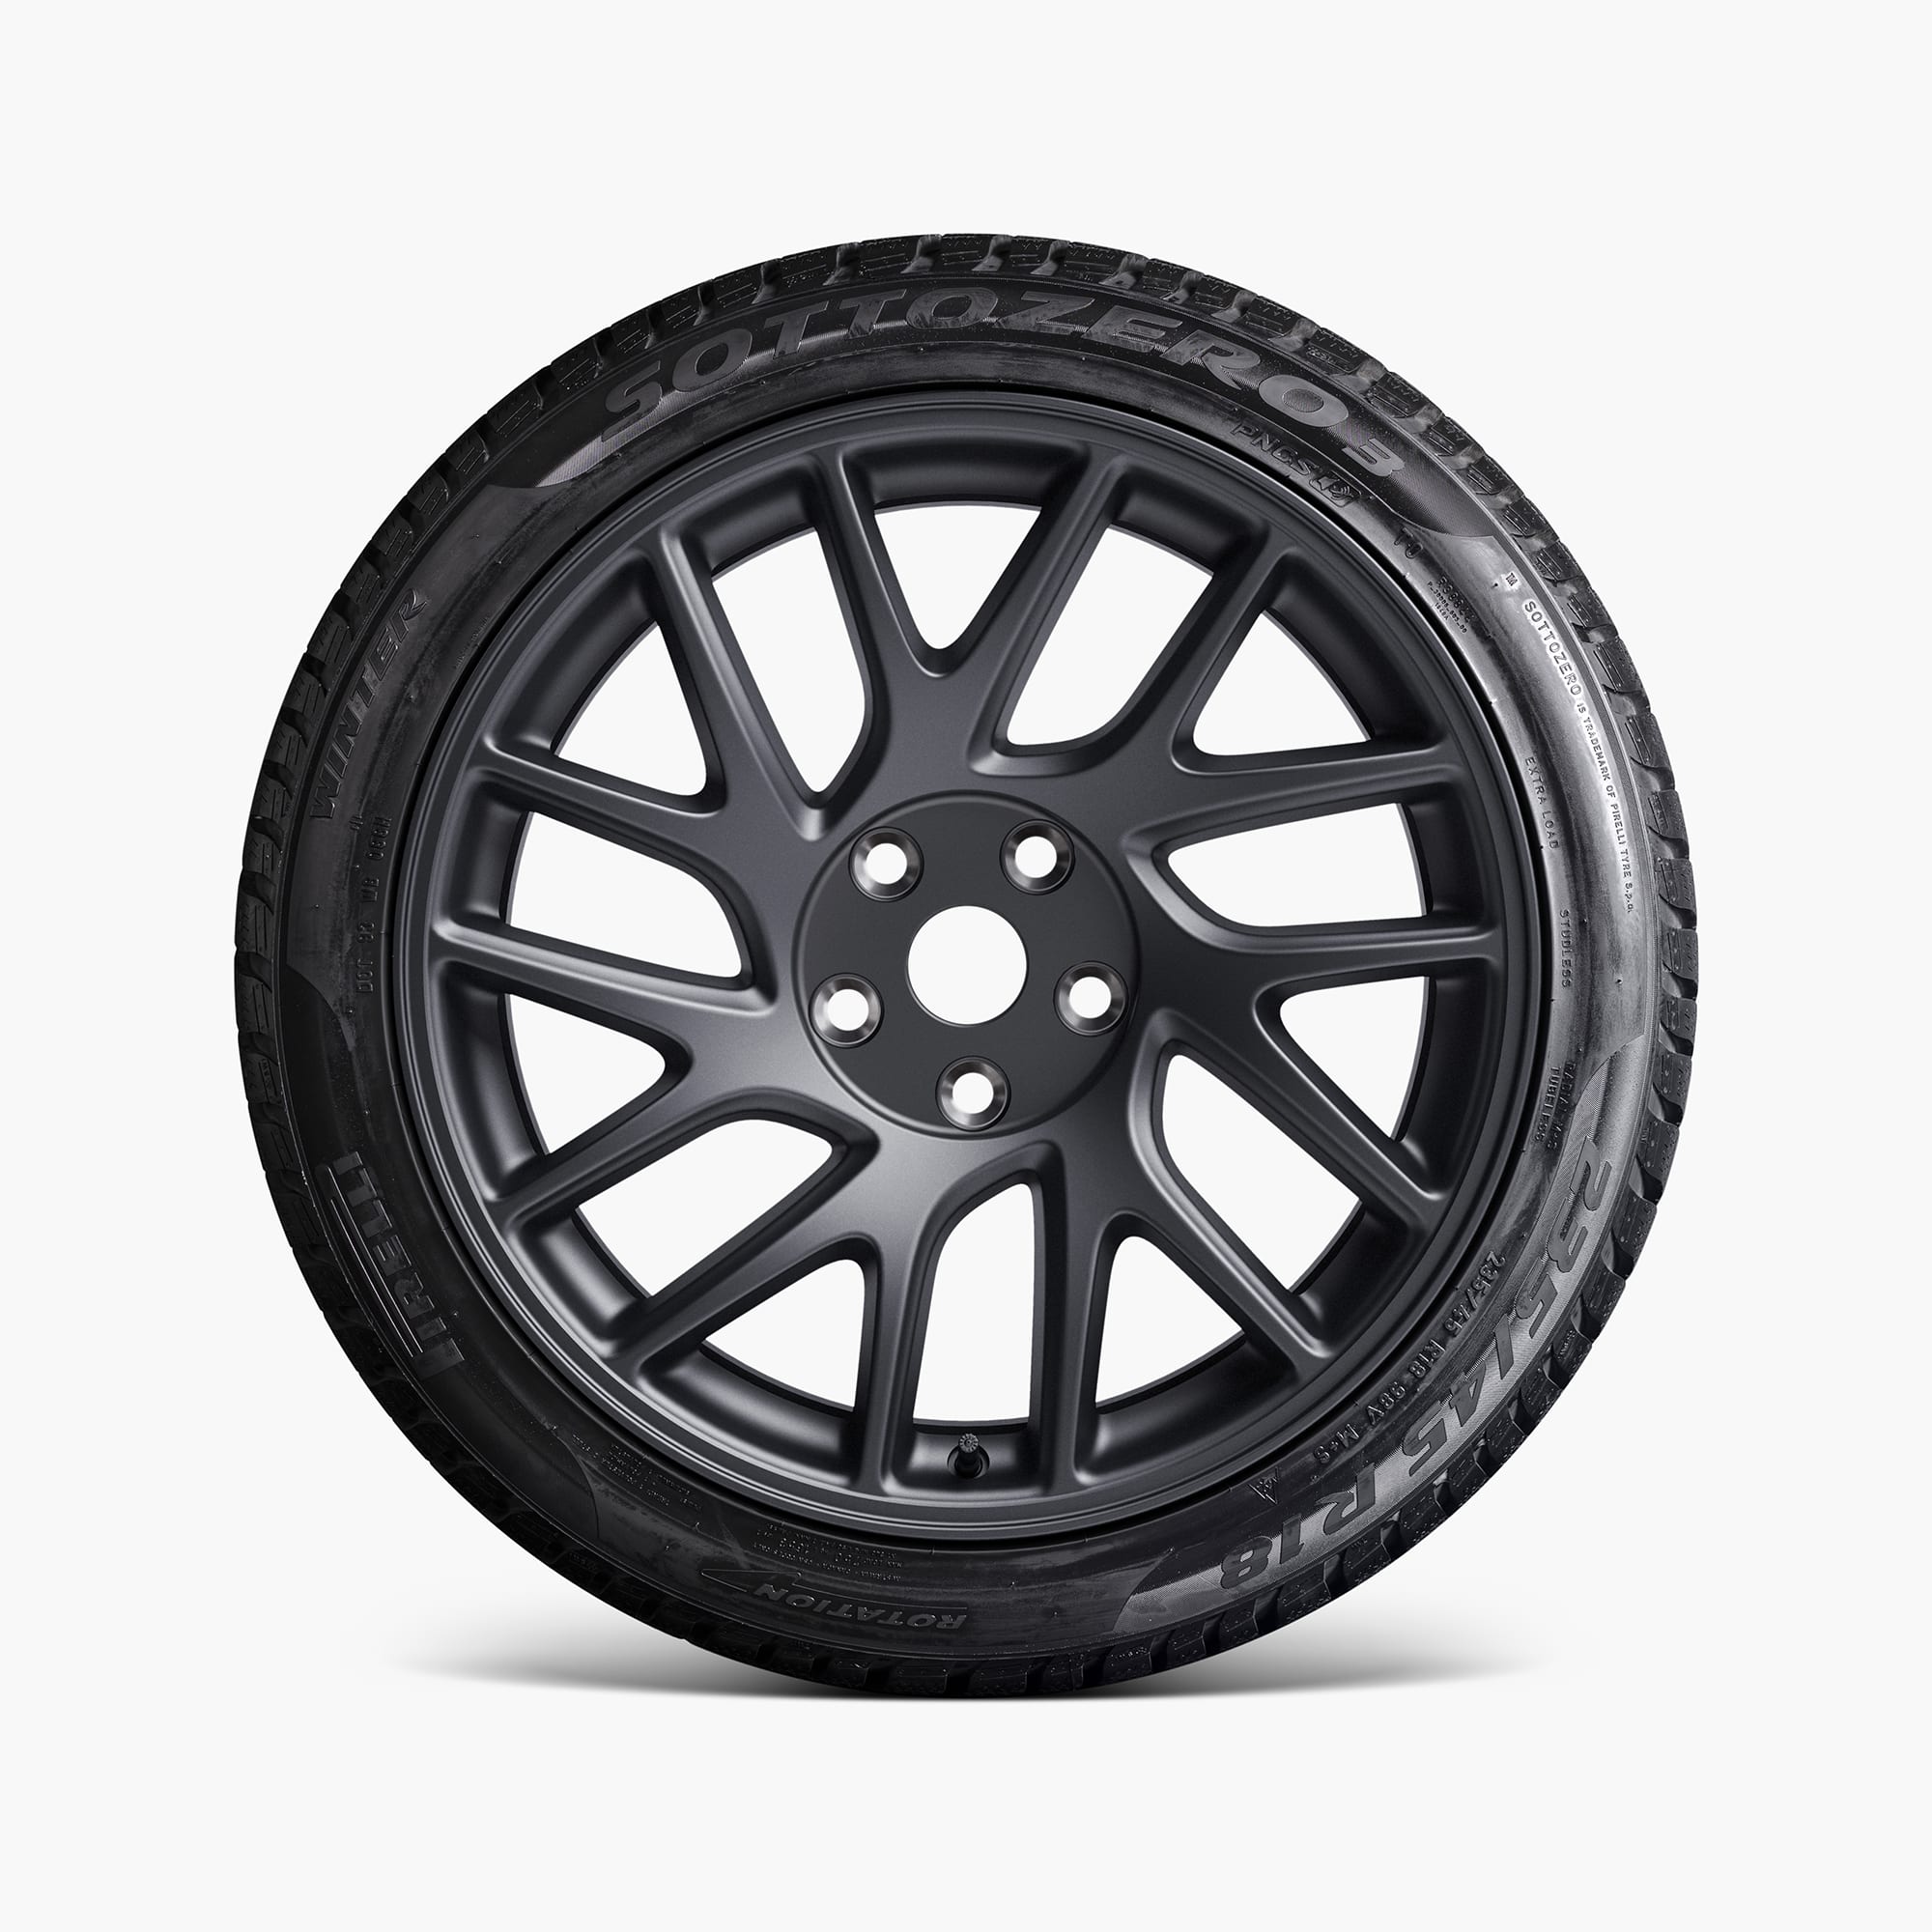 Model 3 18" Photon Wheel and Winter Tire Package